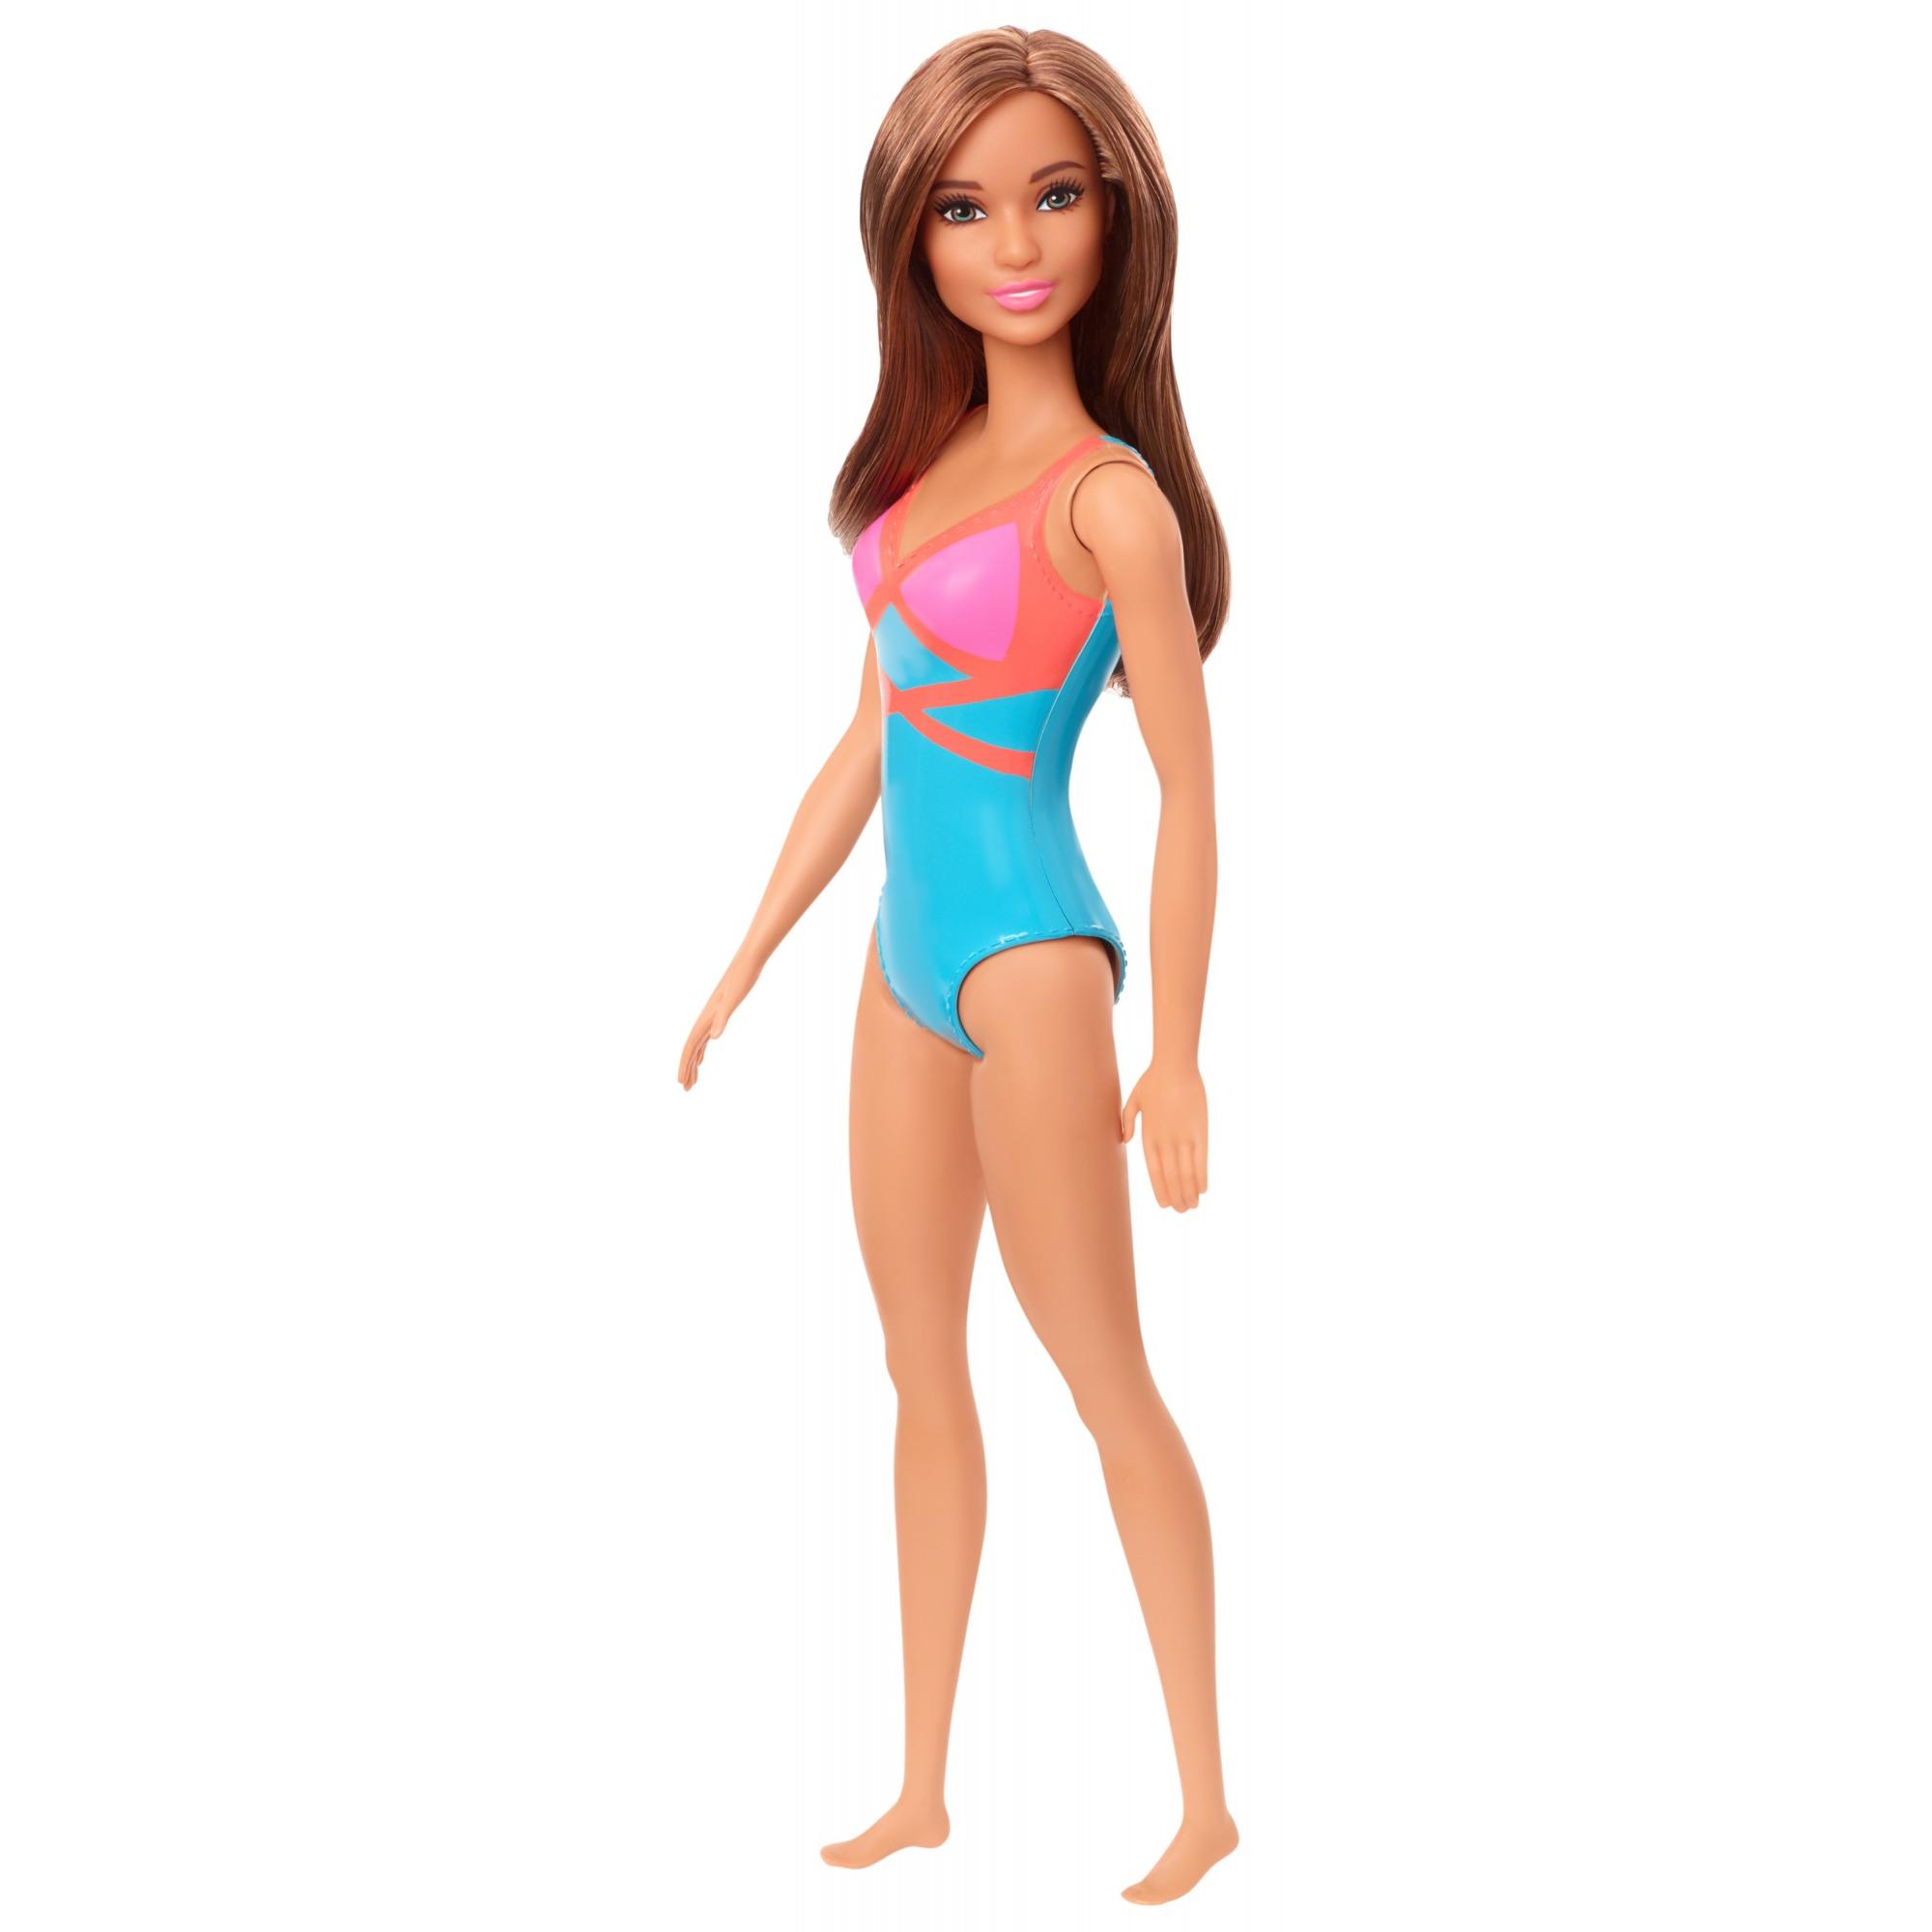 Barbie Doll, Brunette, Wearing Swimsuit, For Kids 3 To 7 Years Old, Brunette - image 5 of 6